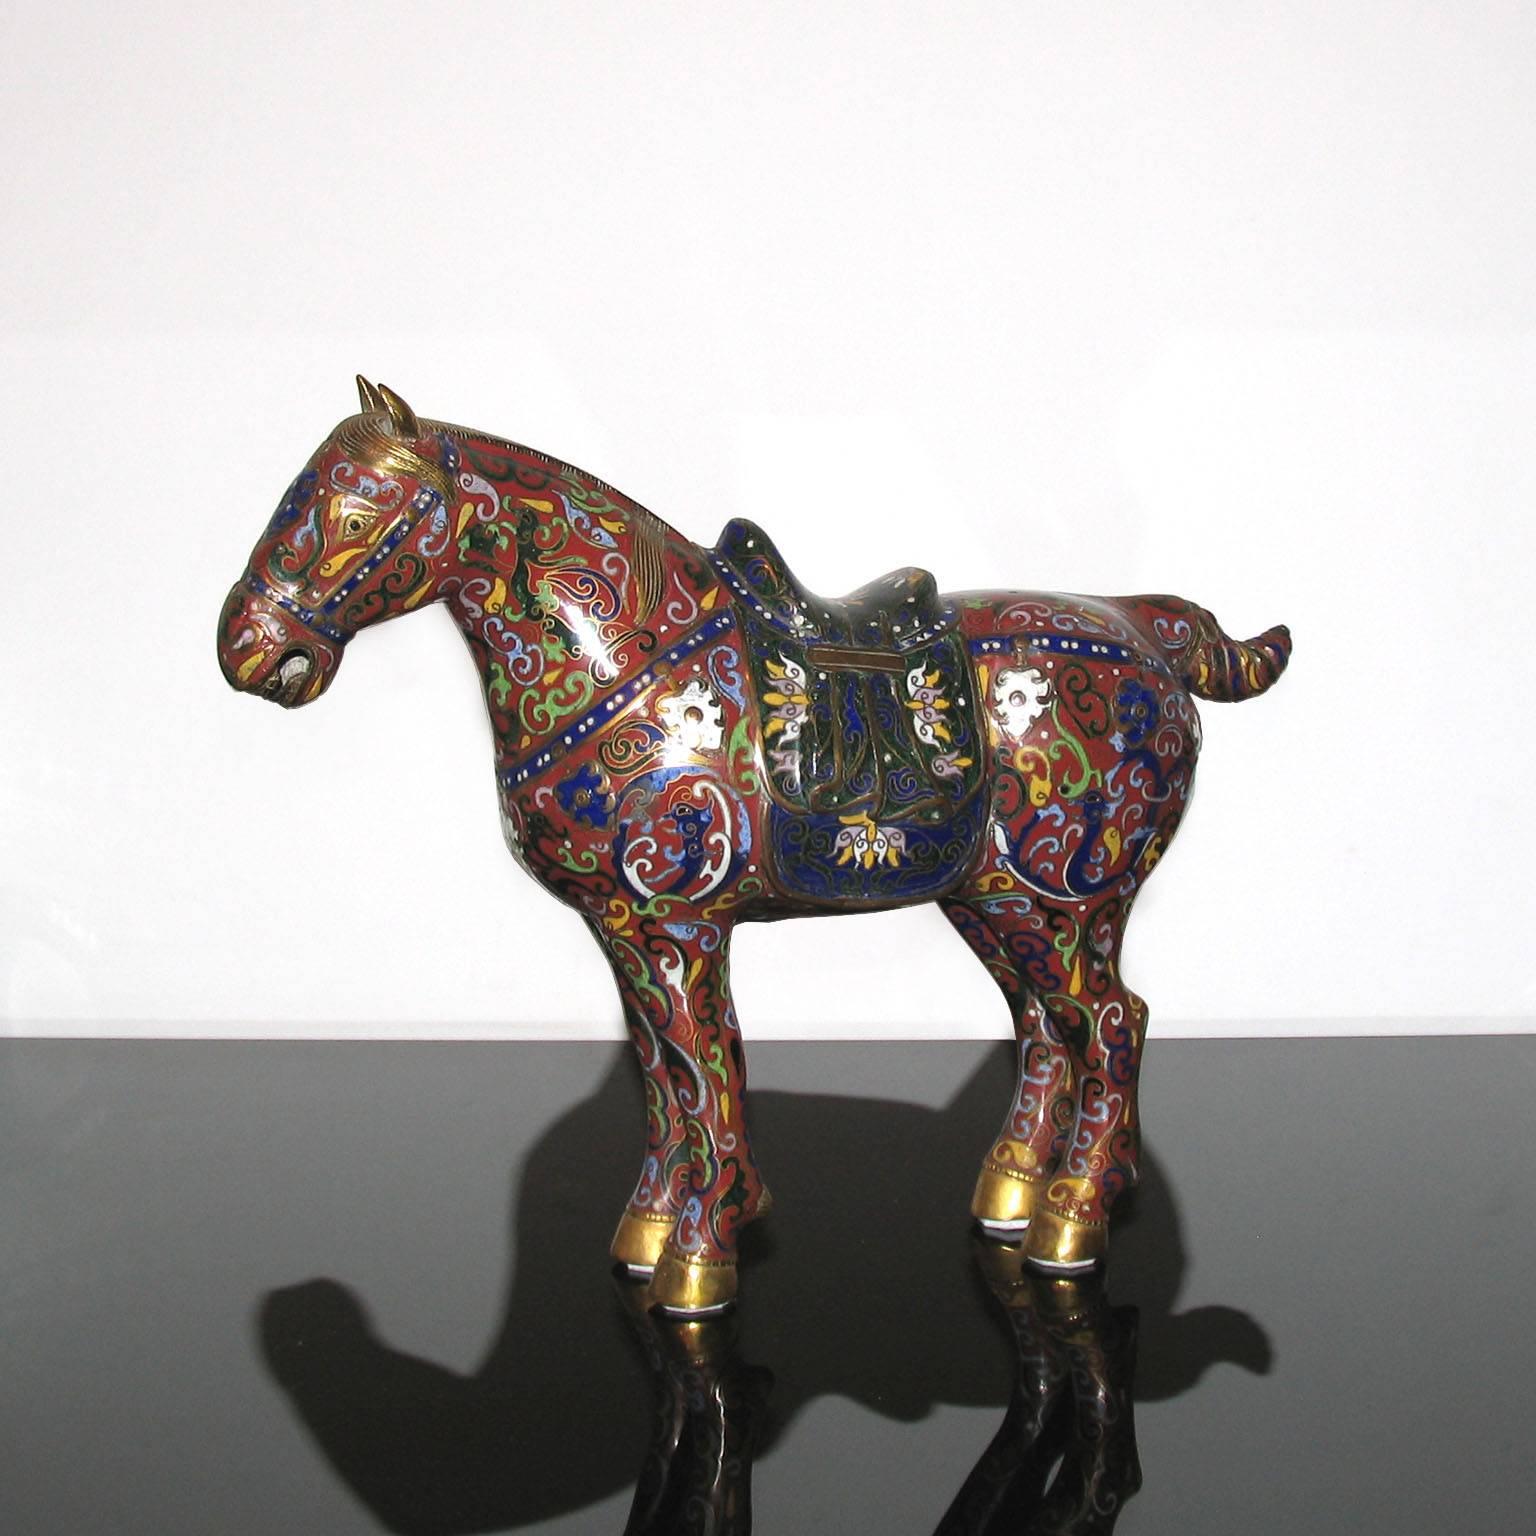 handcrafted in floral patterns over a gilded metal background Pair of Old Chinese Cloisonné Horse Figurines